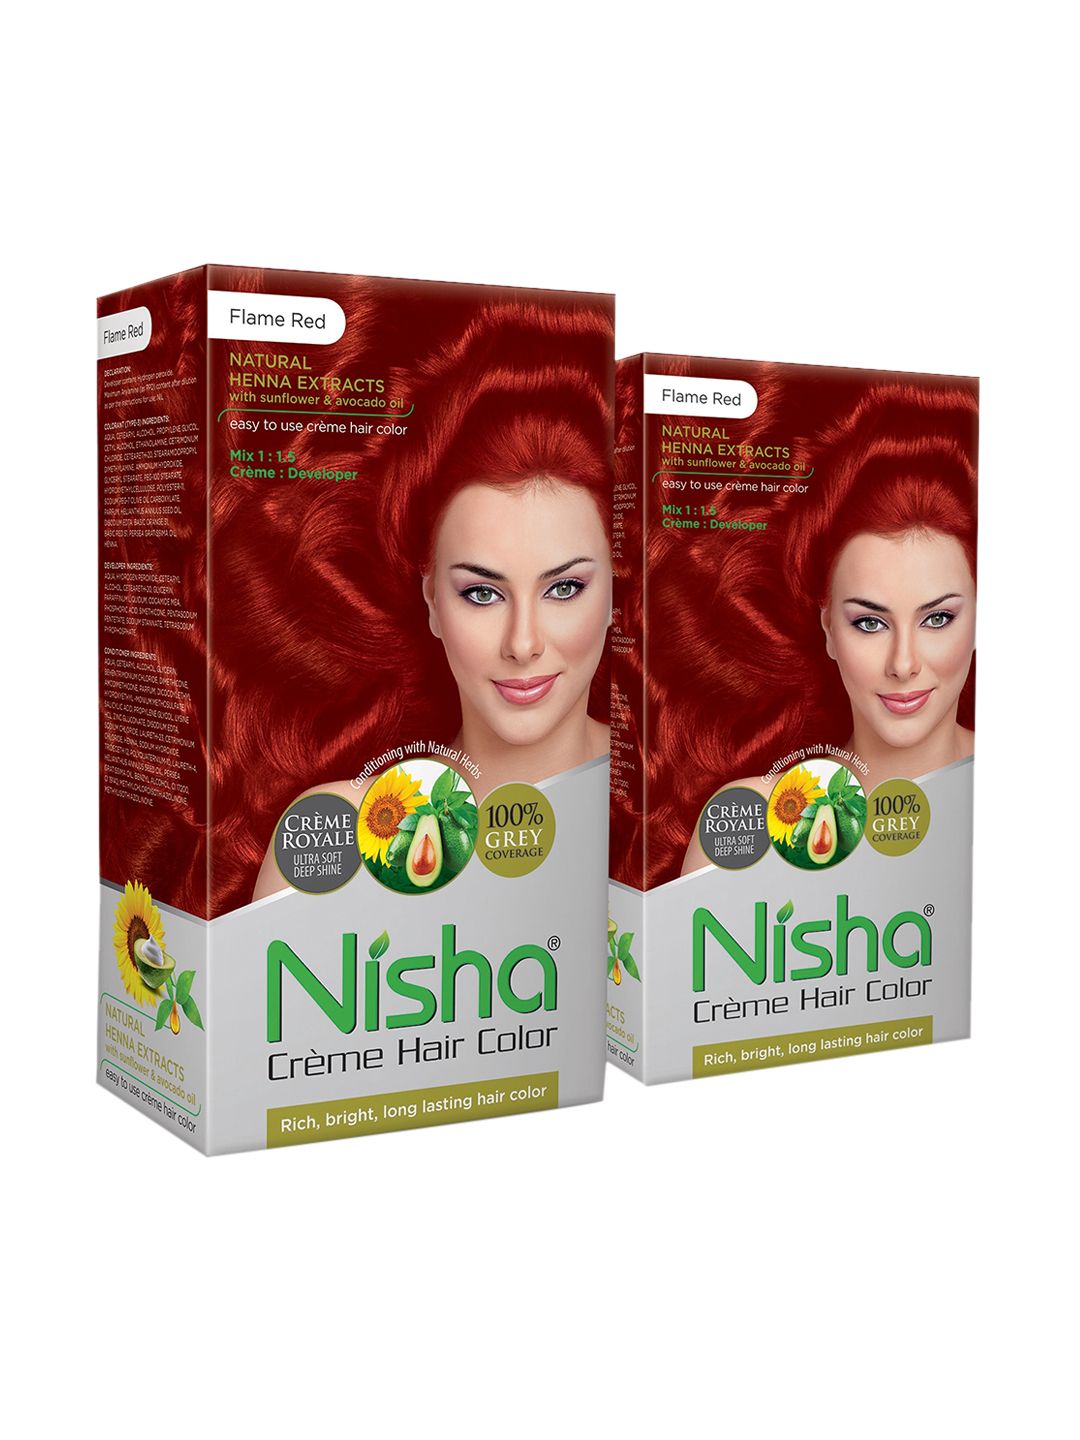 Nisha Pack of 2 Creme Hair Colour 300g - Flame Red Price in India